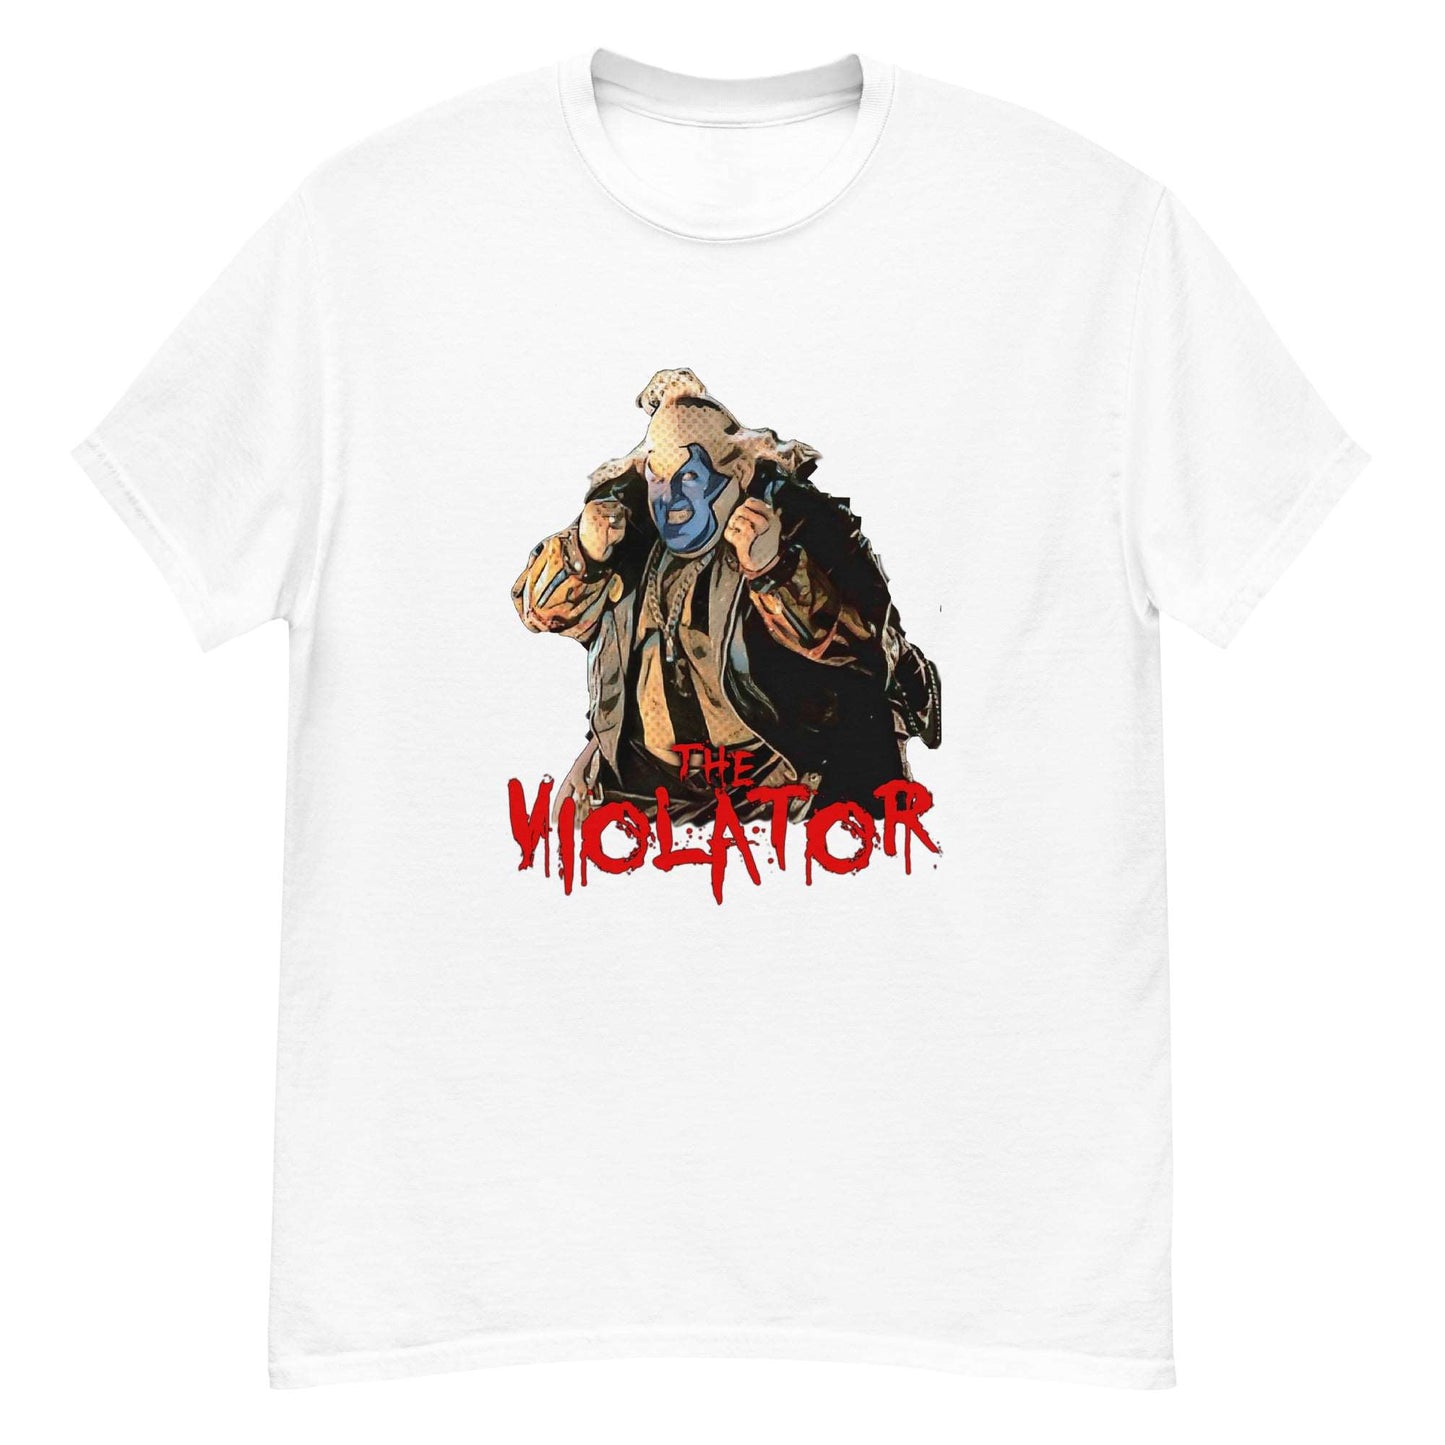 Spawn T-Shirt - Featuring The Violator from the 90s Movie - thenightmareinc